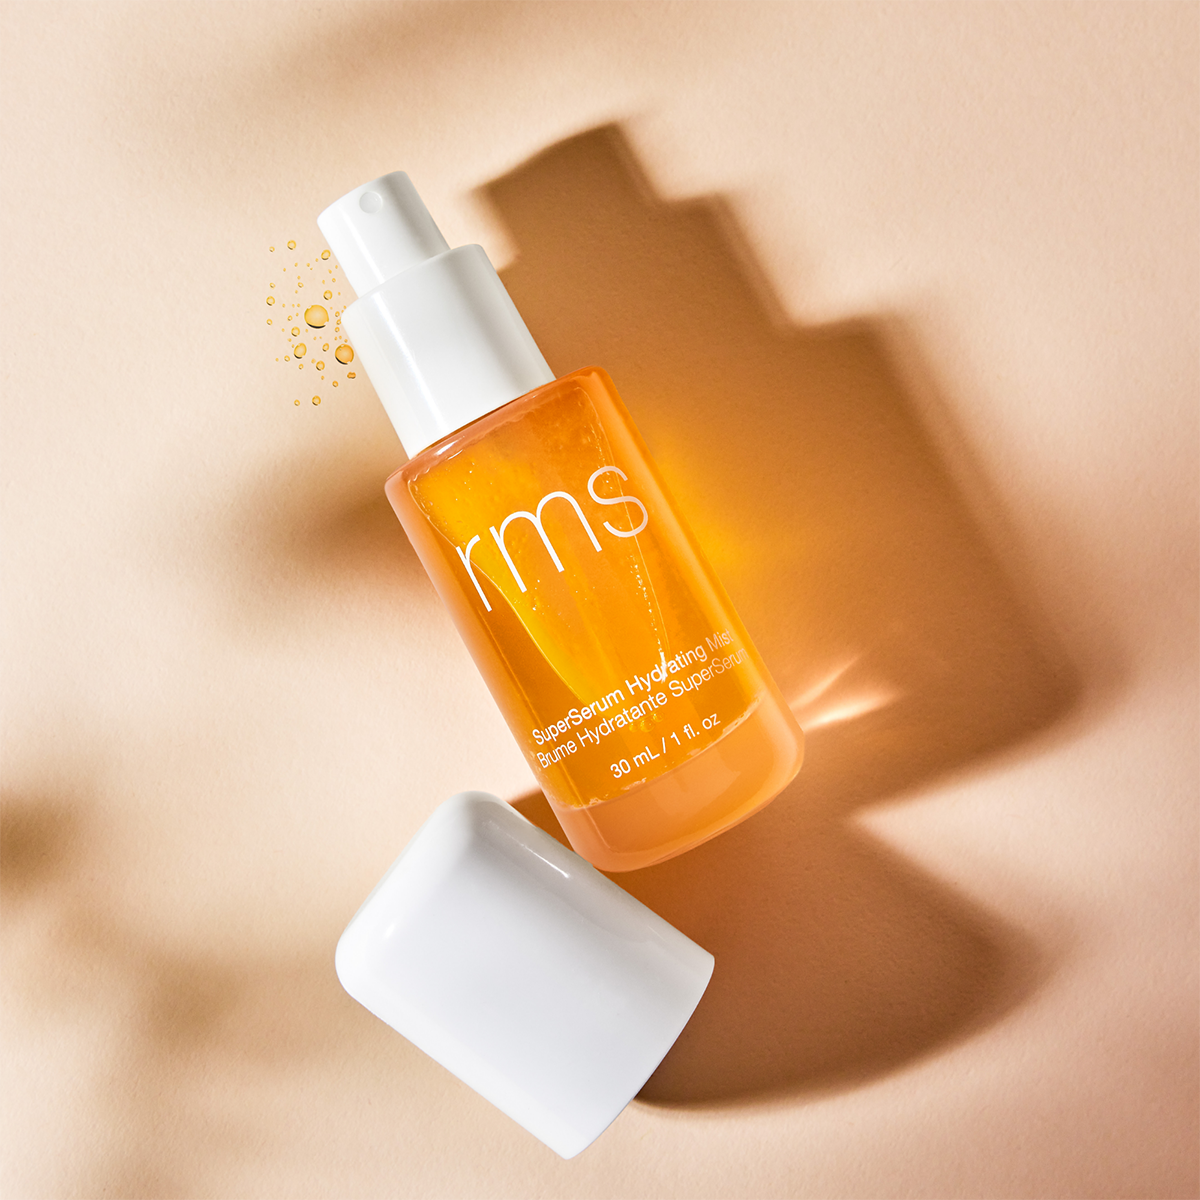 RMS Beauty - SuperSerum Hydrating Mist